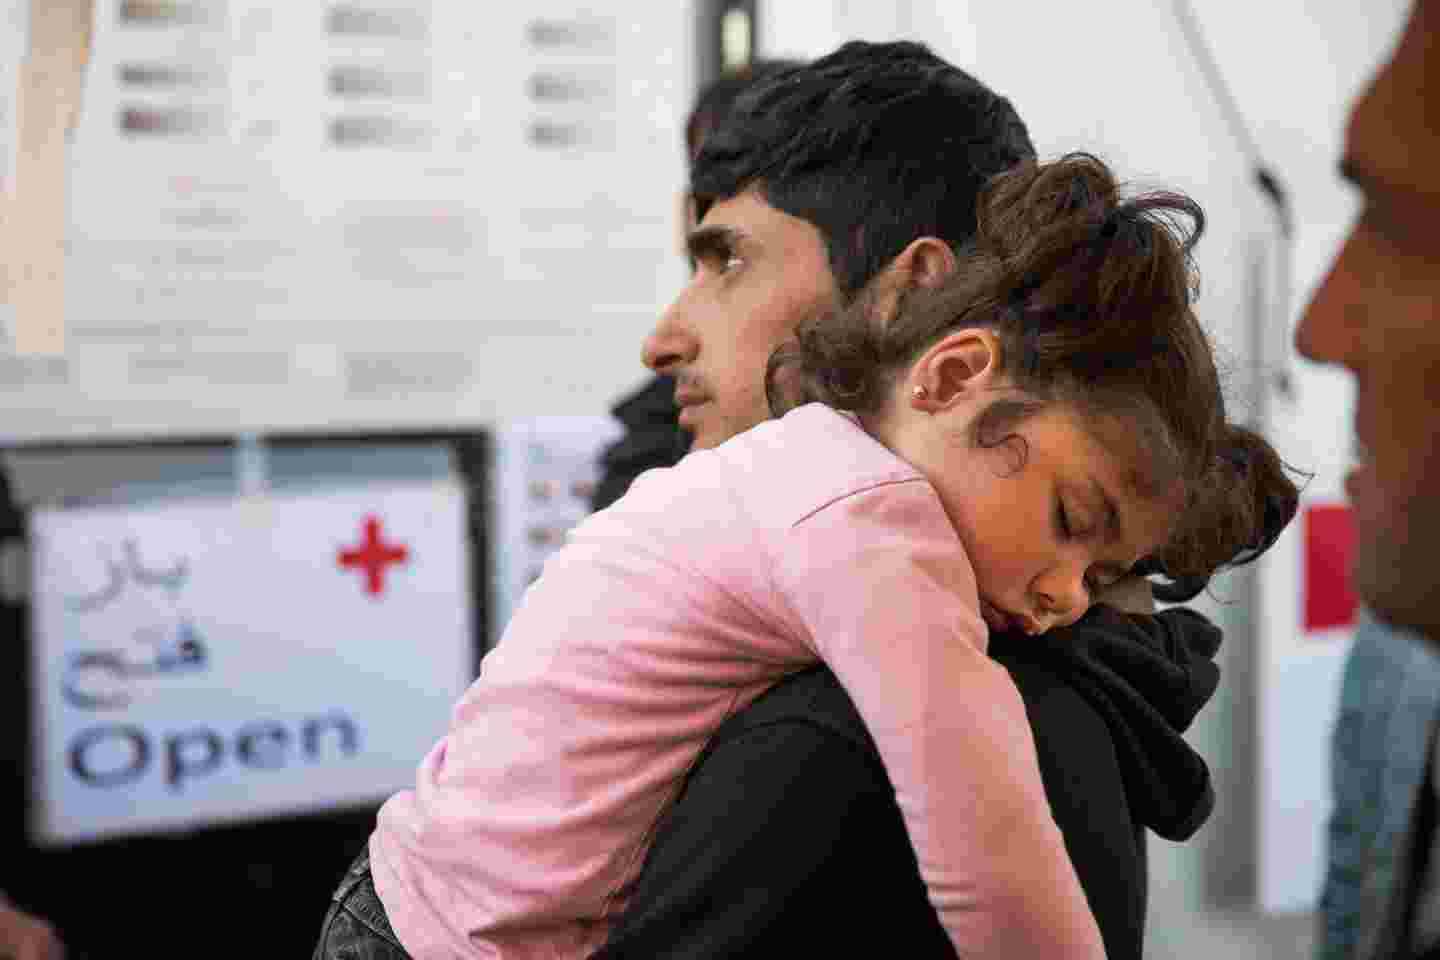 A small girl sleeping against her father’s shoulder at a Red Cross office where they have come for help.